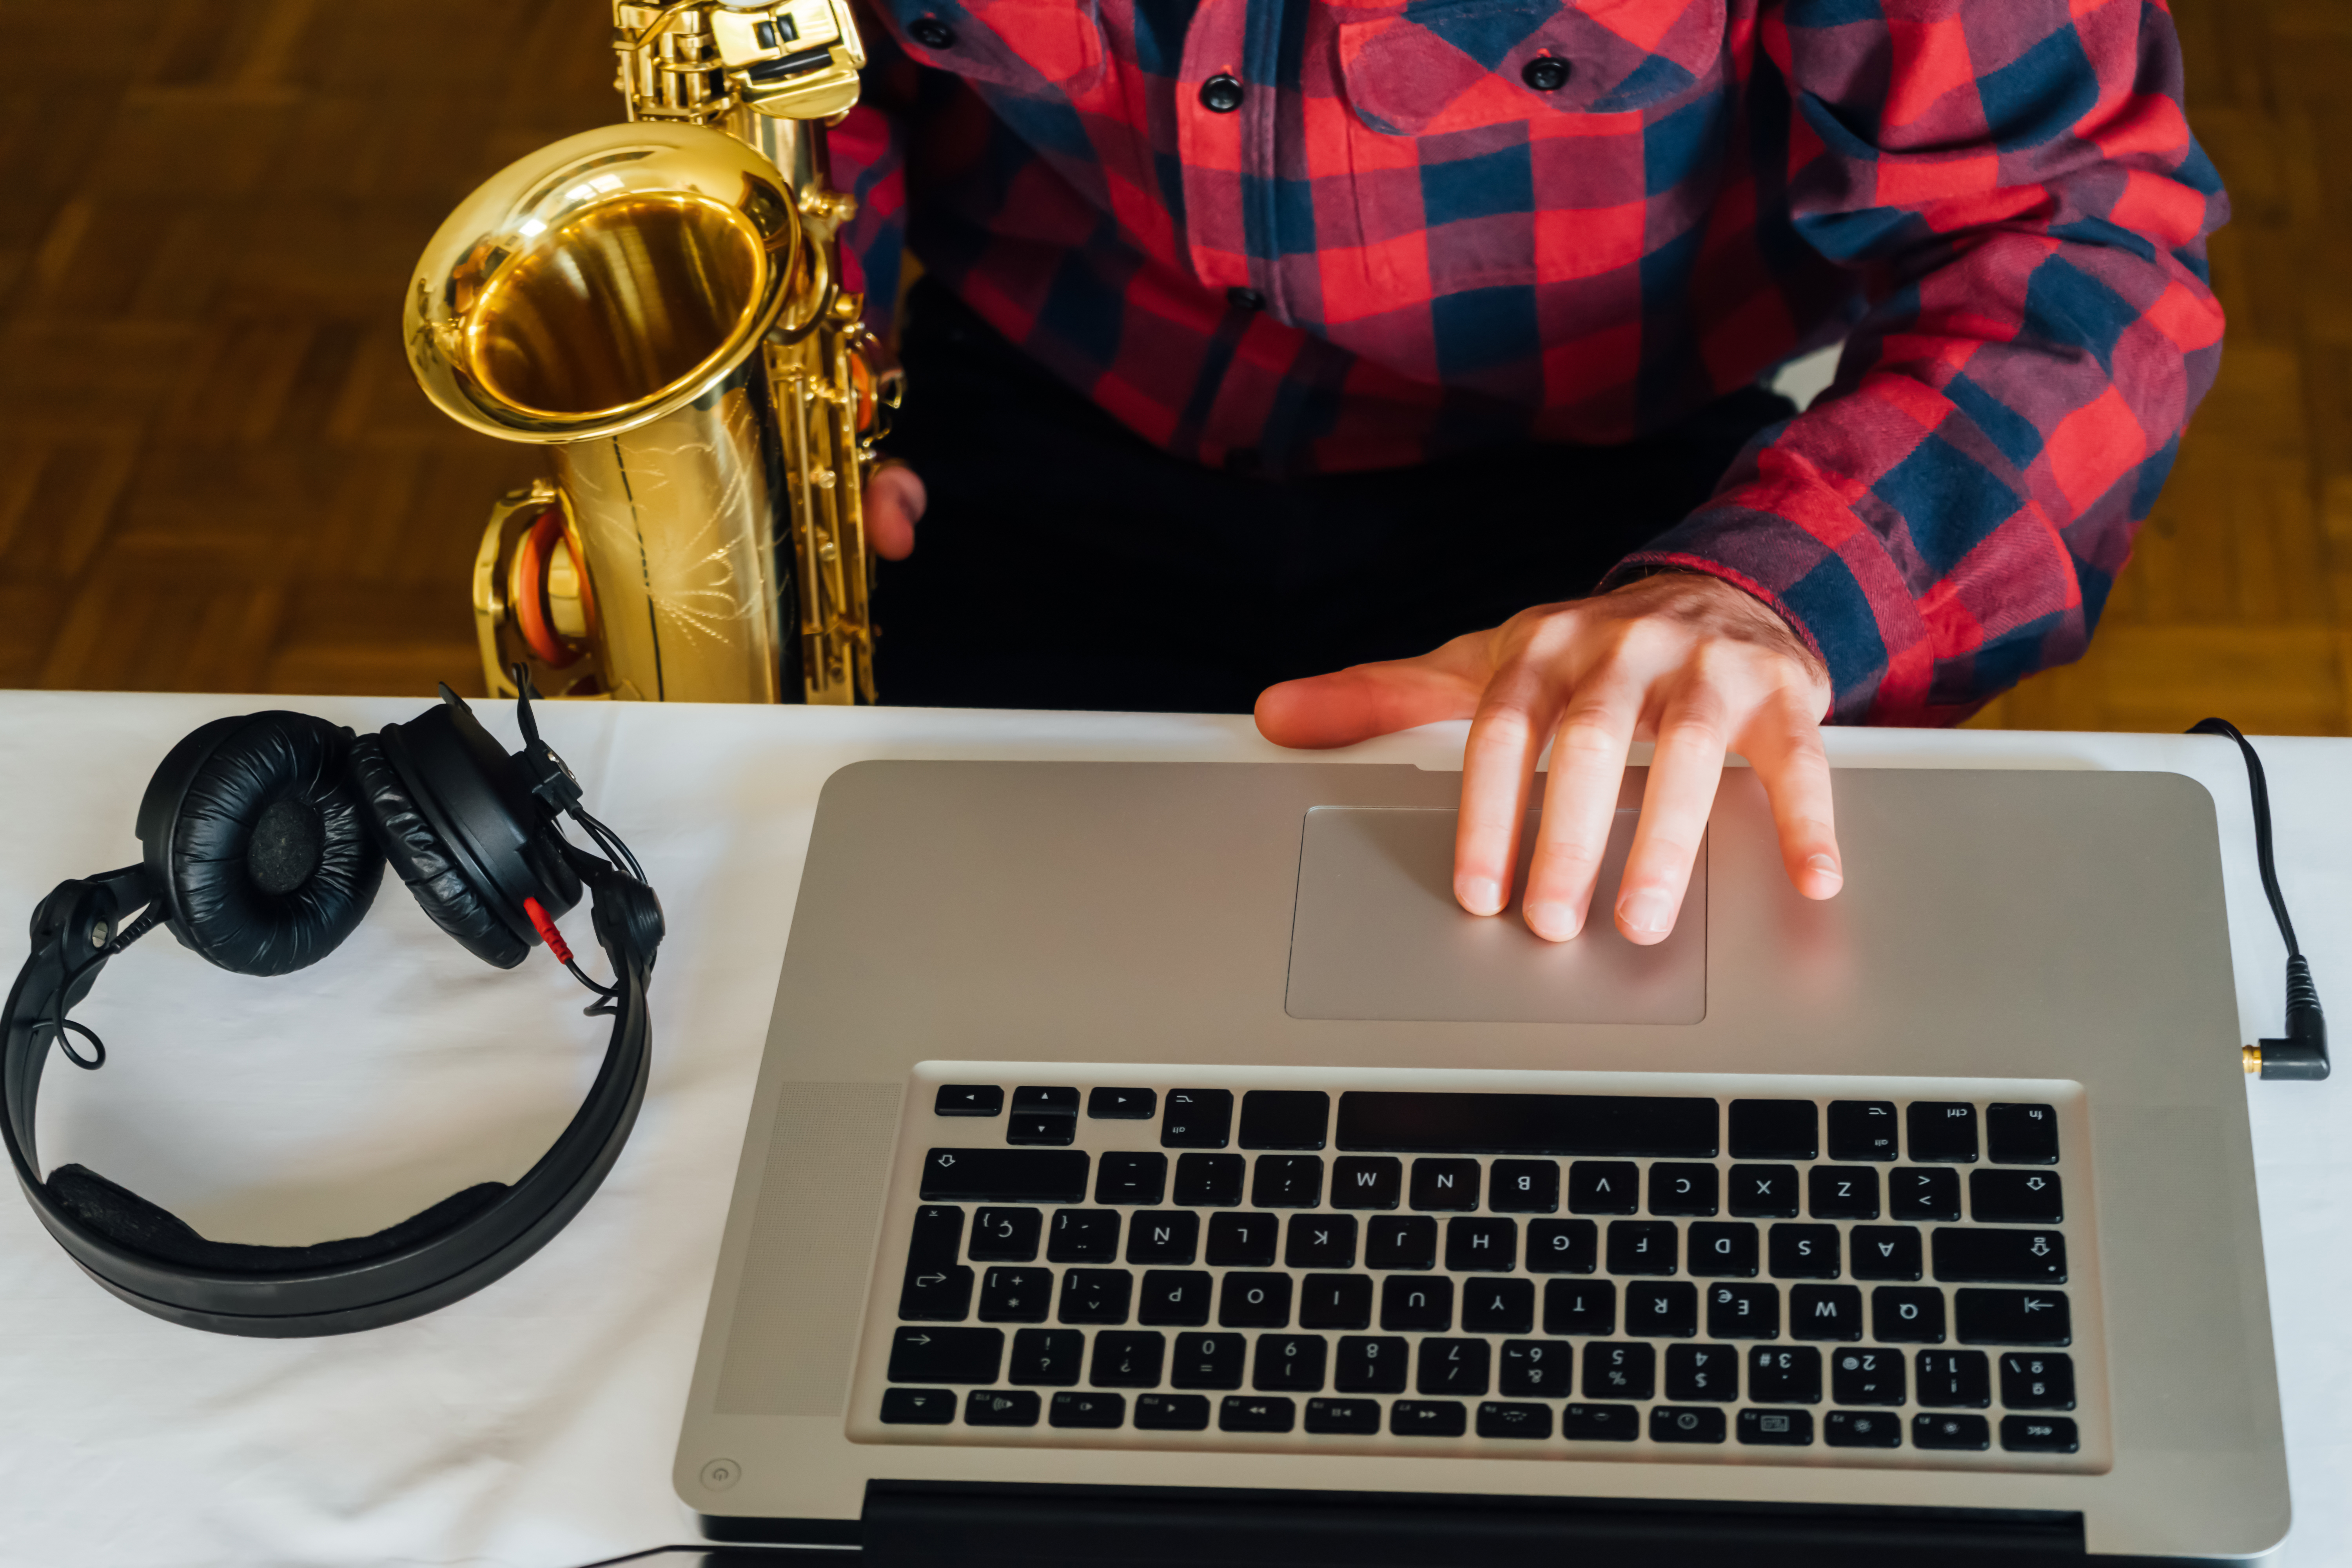 A neck-down image of man in a red flannel shirt holding a saxophone in his right hand, with his left hand on the trackpad of a laptop and headphones on the table next to the laptop. 